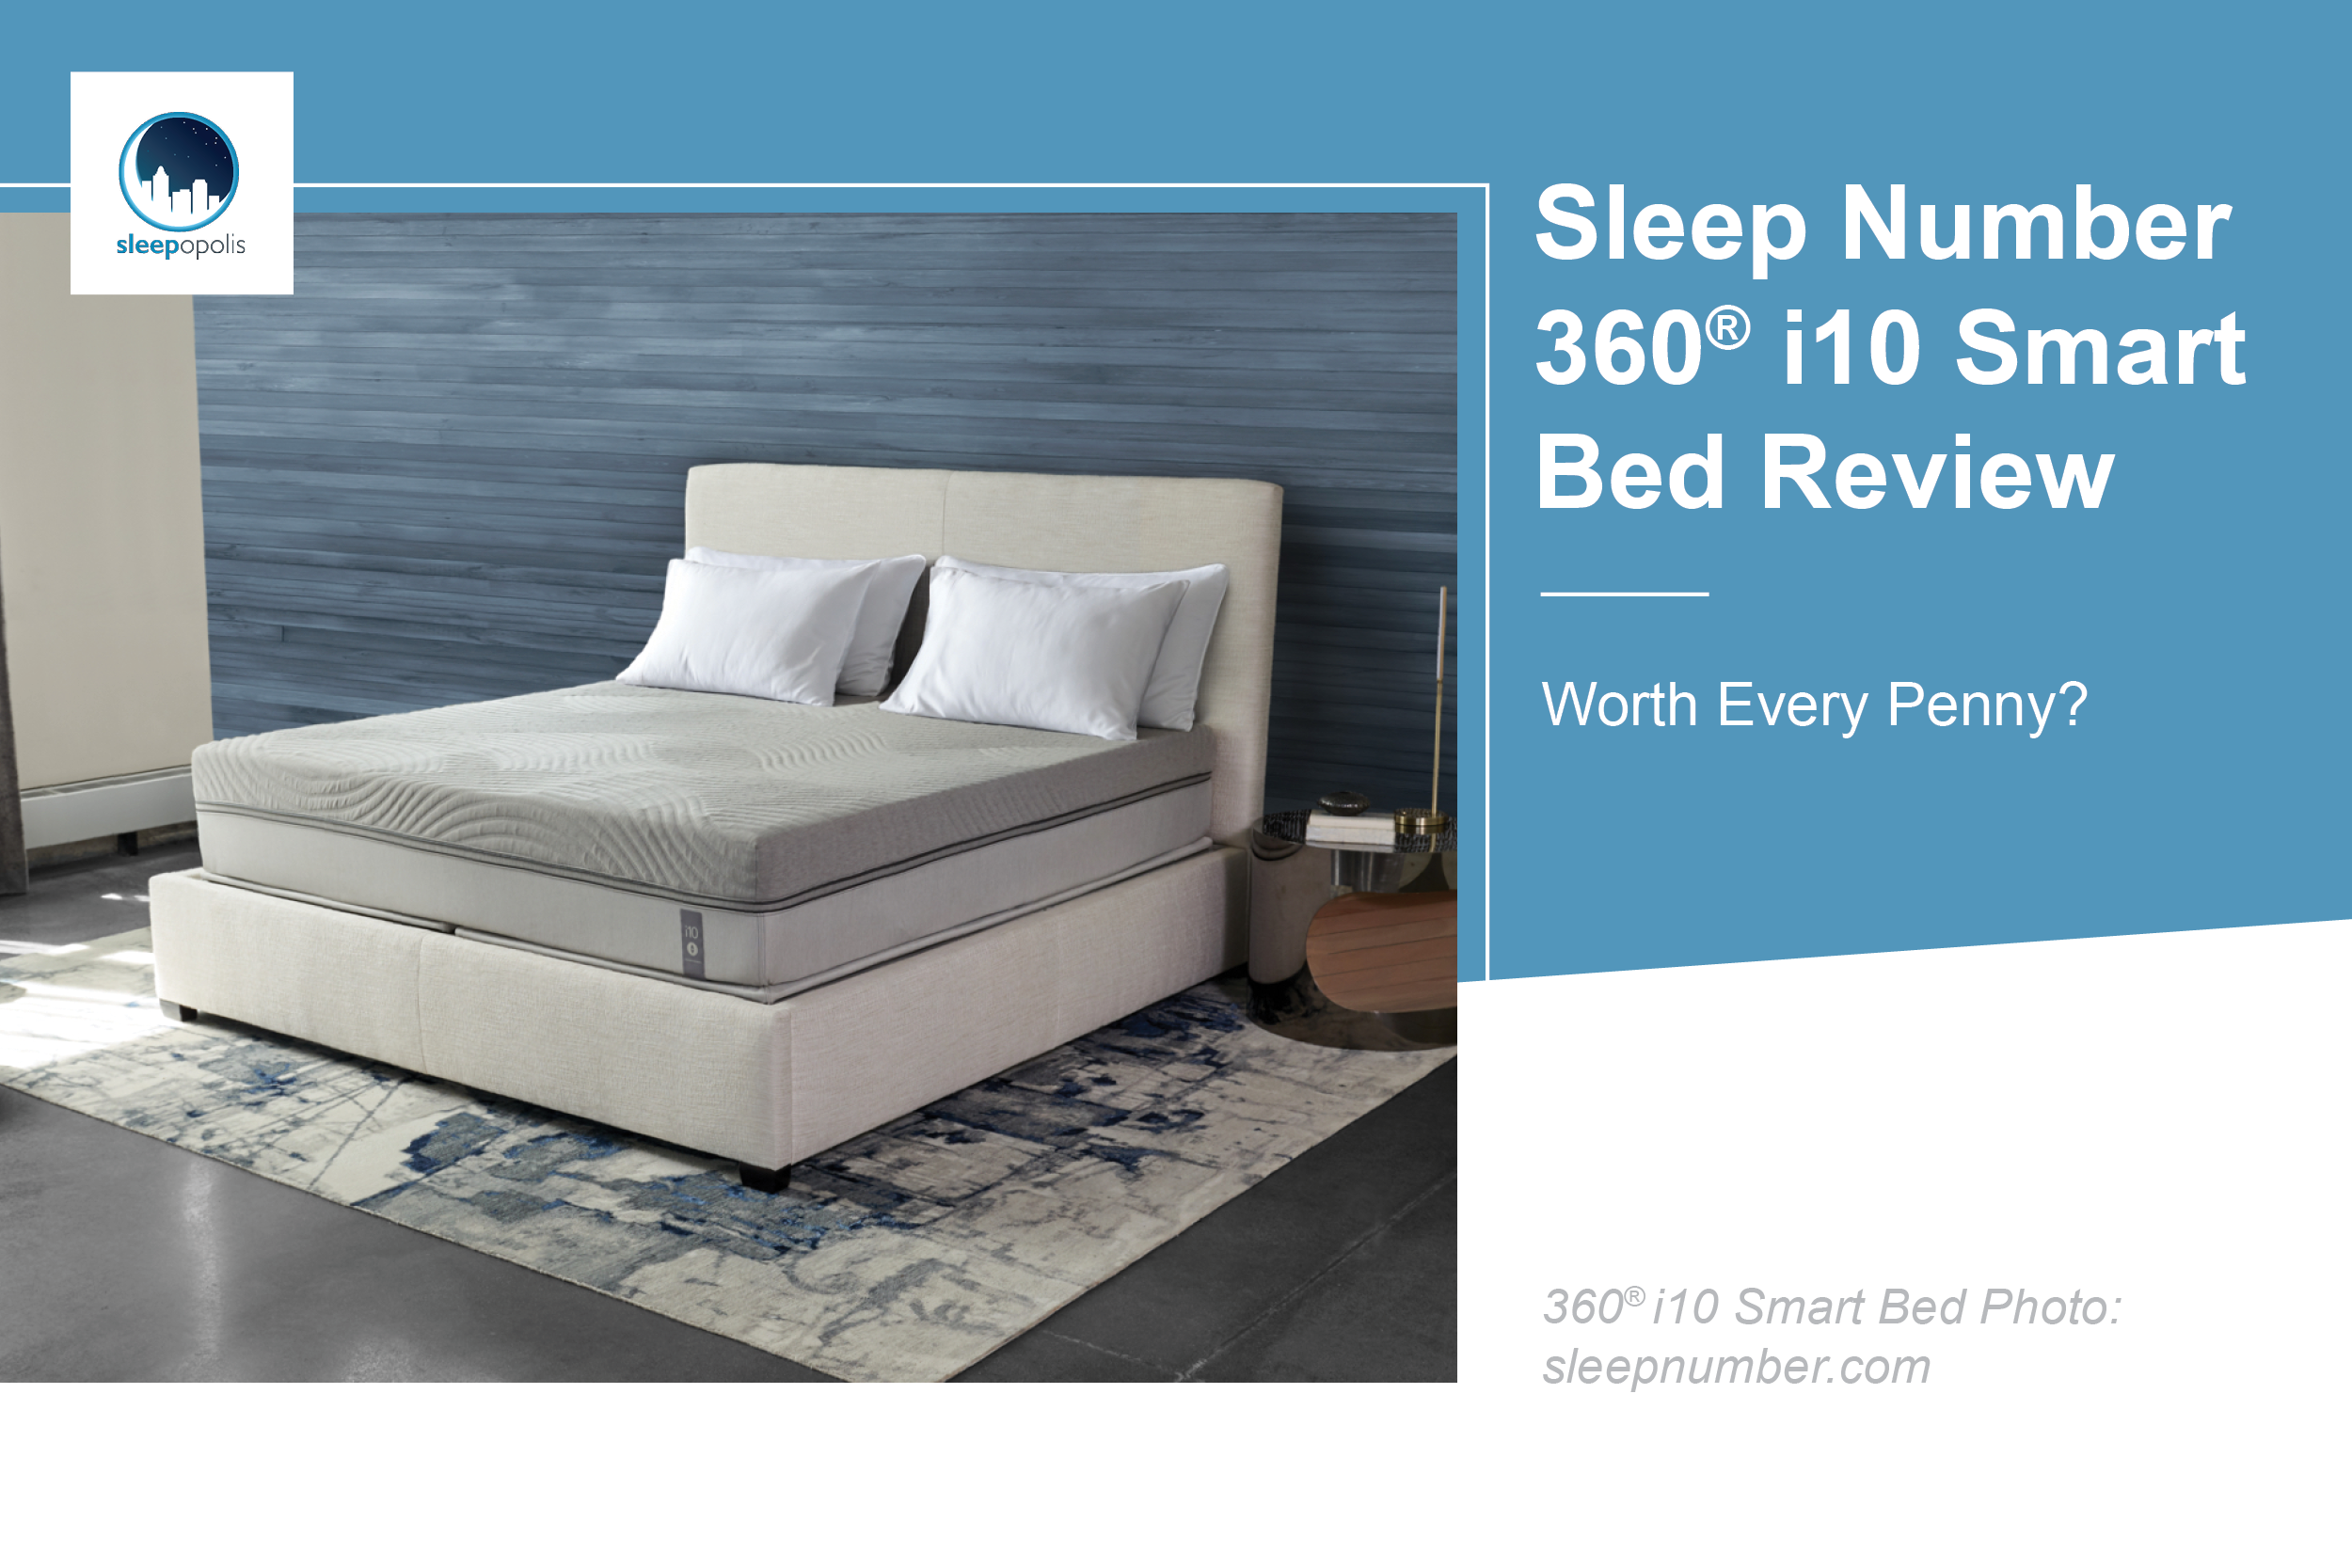 How much does a sleep number 360 smart bed cost Sleep Number 360 I10 Review 2021 Sleepopolis